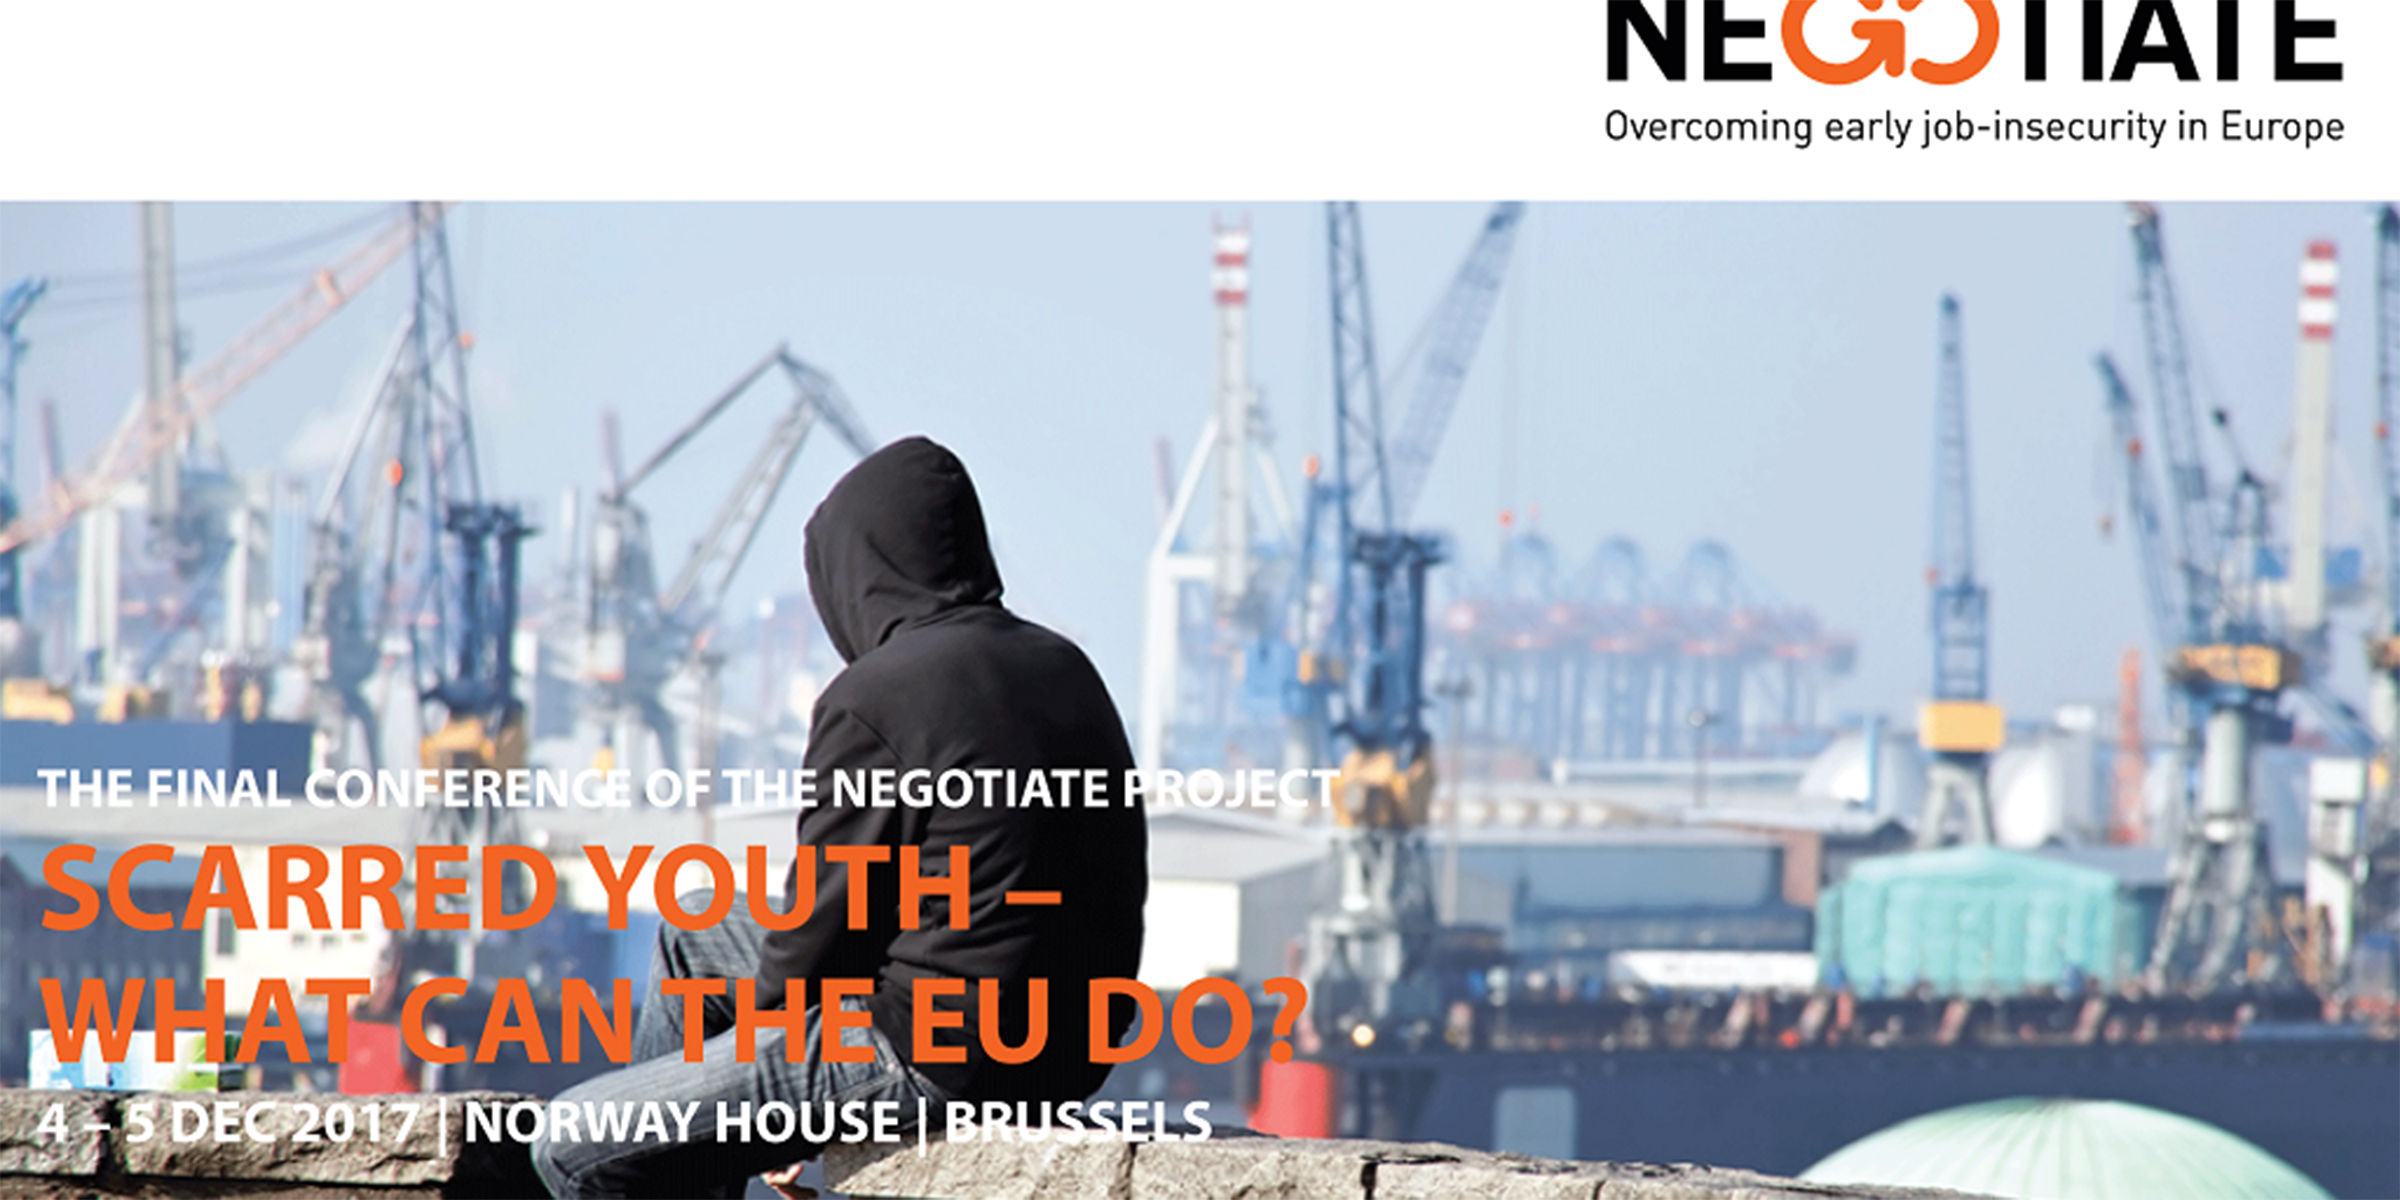 The header of the final Negotiate conference